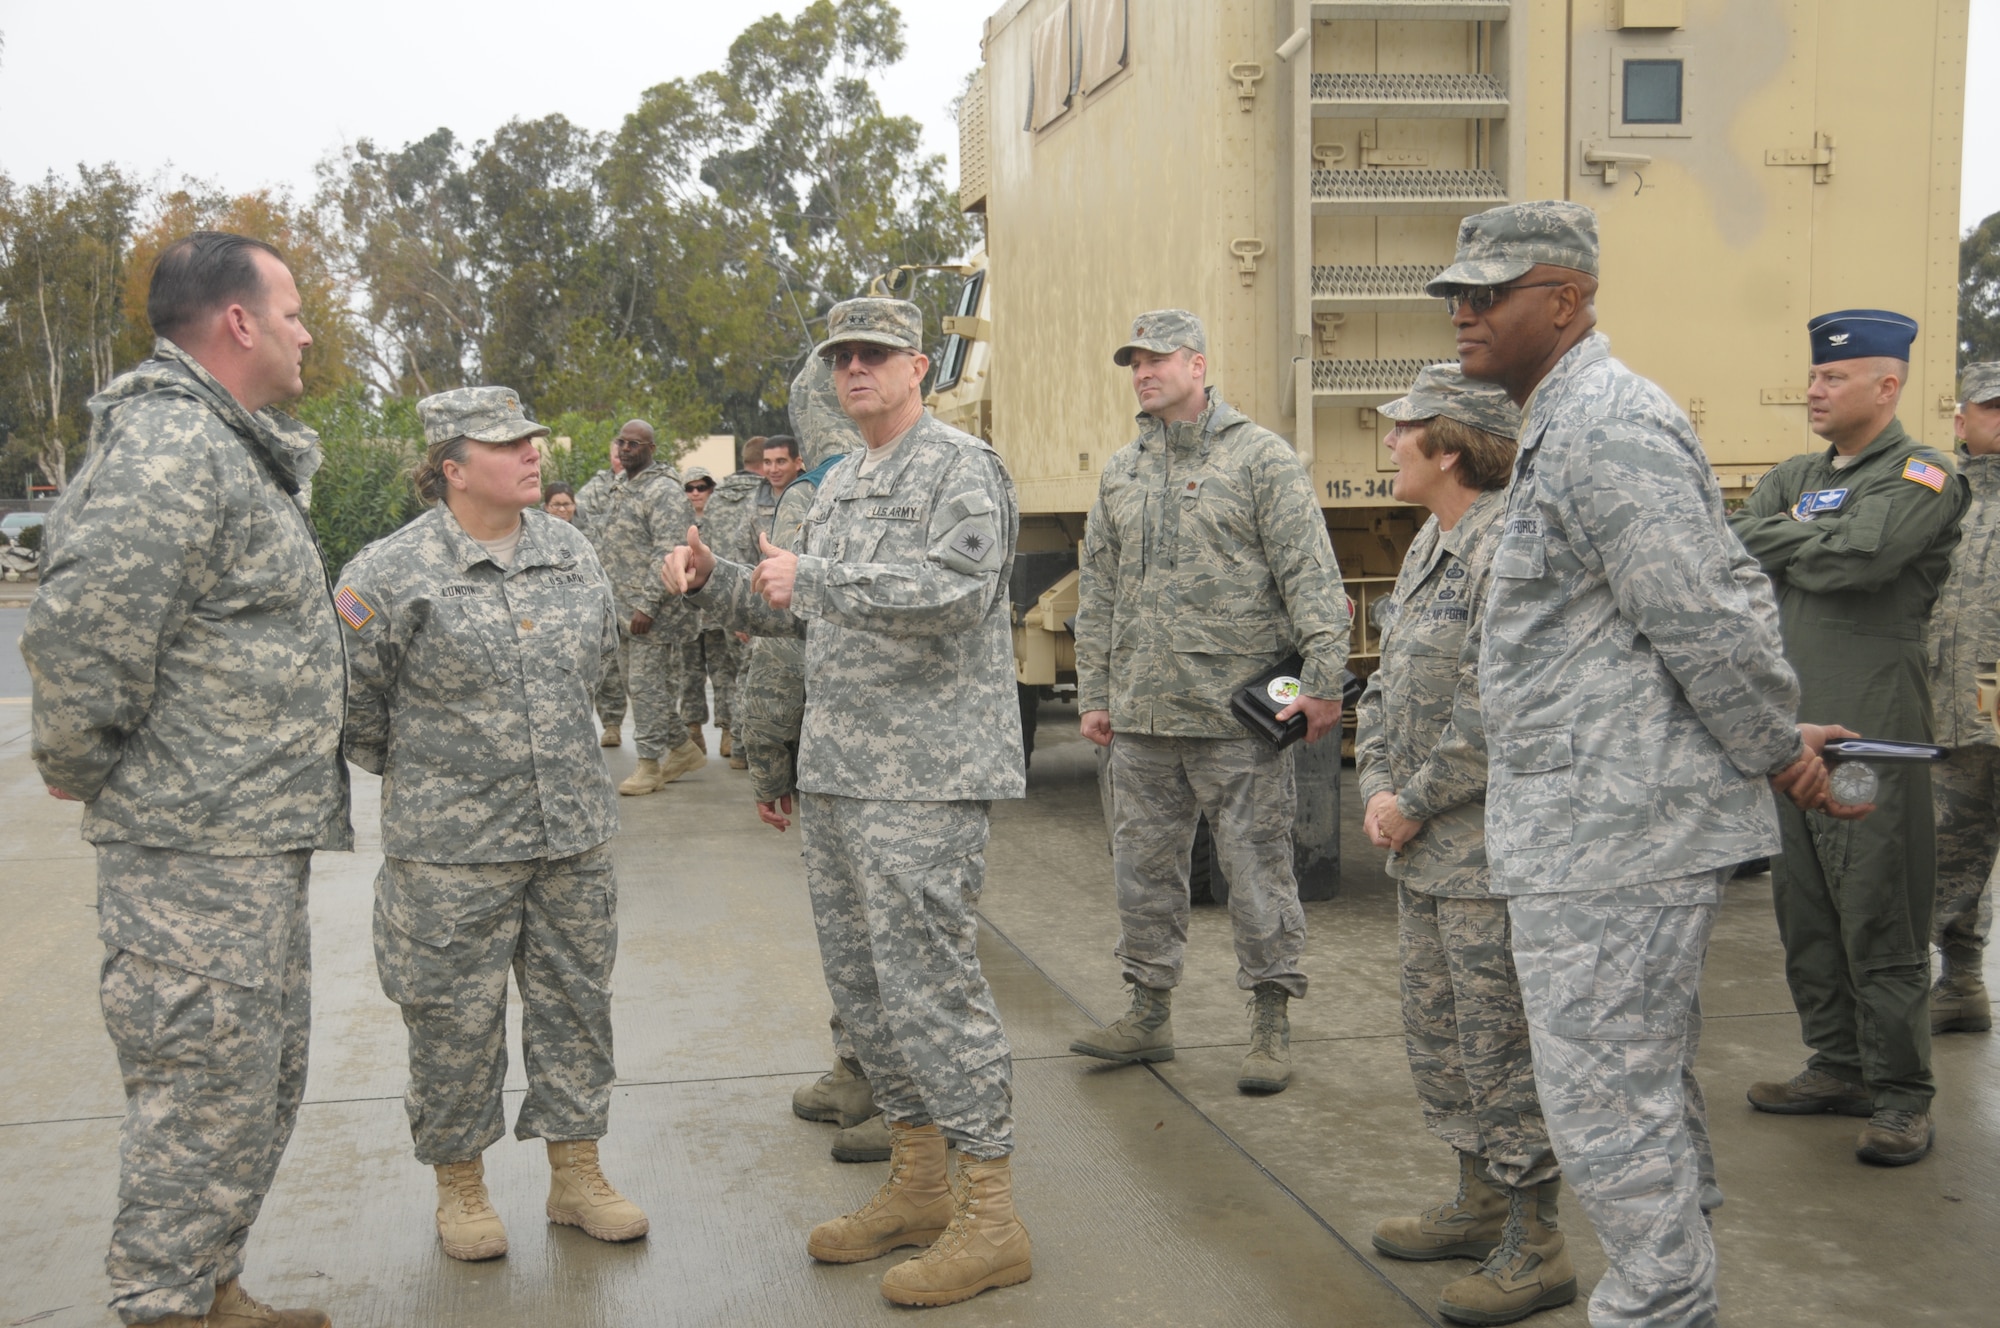 Major General Keith D. Jones, commander of the 40th Infantry Division in Los Alamitos, Calif. is briefed by Soliders from the 340th Bravo Company and Airmen from the 14th Airlift Wing during a during a Joint Reception Staging Onward Integration exercise training on March 1, 2014. Maj. Gen. Jones was on-hand to observe the exercise and progress of Soliders and Airmen during this JRSOI prep.  (Air National Guard photo by Airman First Class Madeleine Richards)